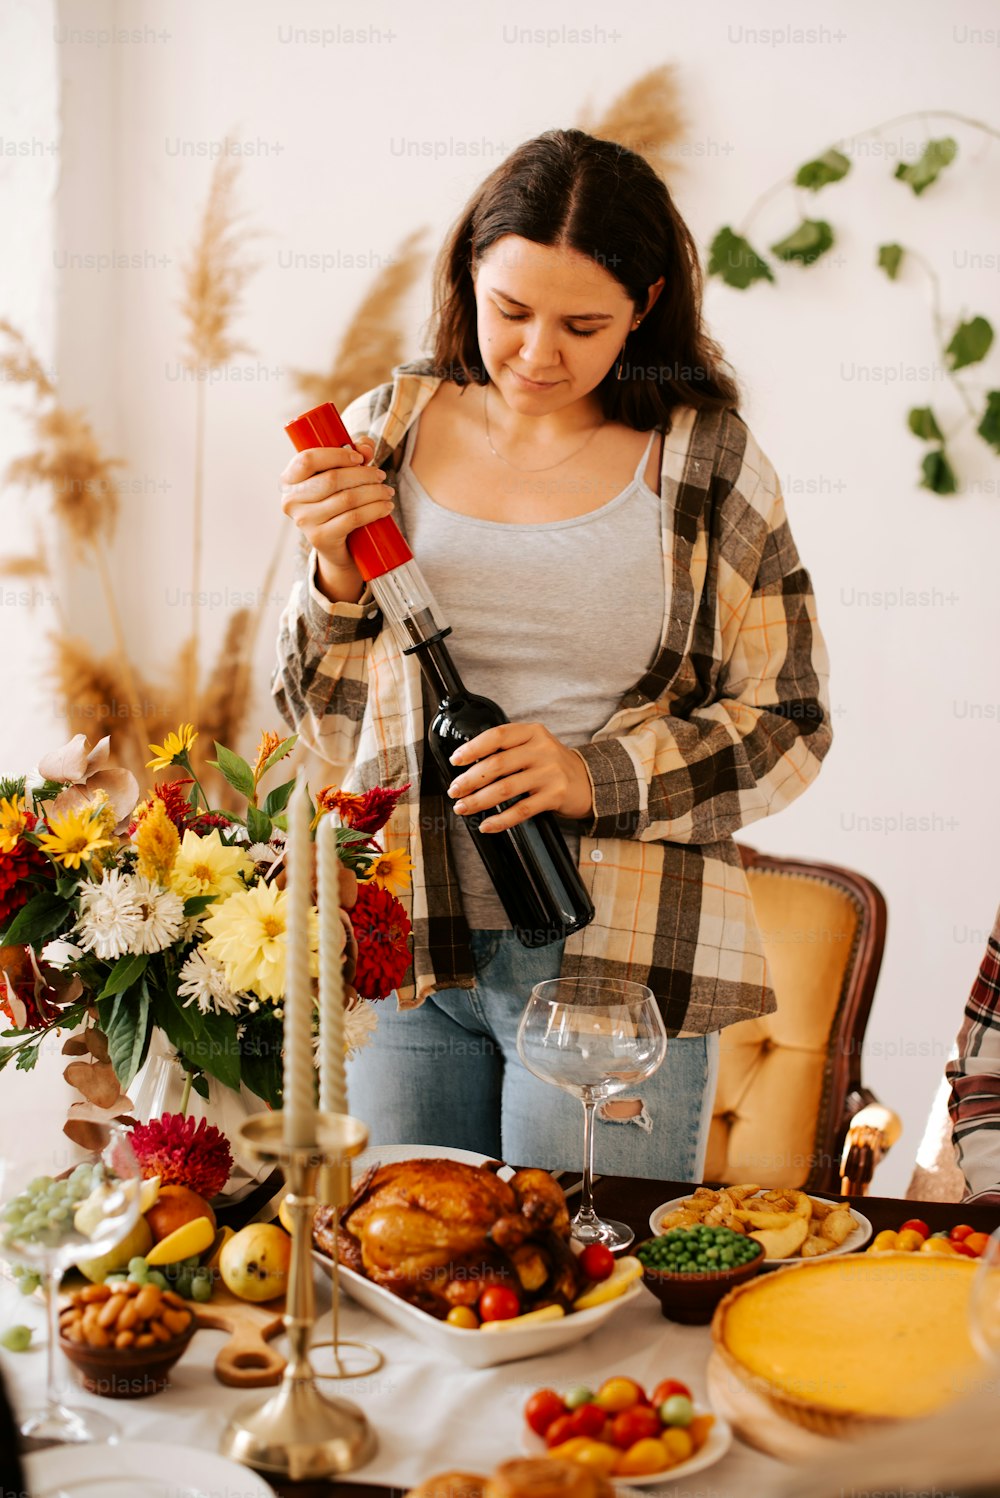 a woman pouring a glass of wine in front of a table full of food